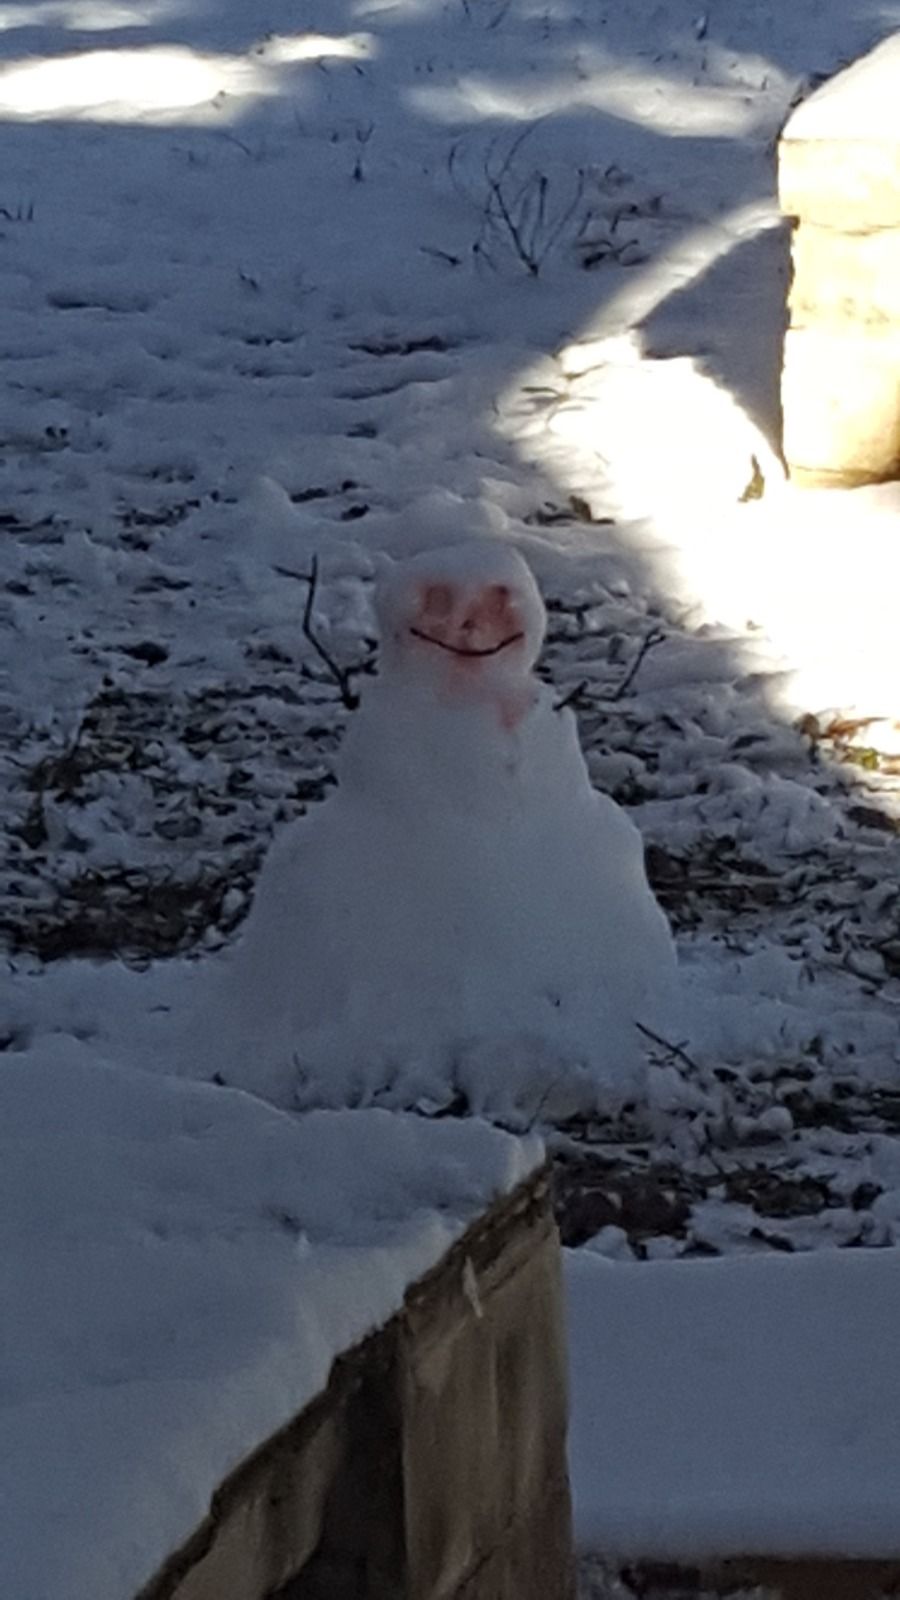 My sister built a snowman using peppermints for the eyes. This is what her husband saw out the window the next morning.